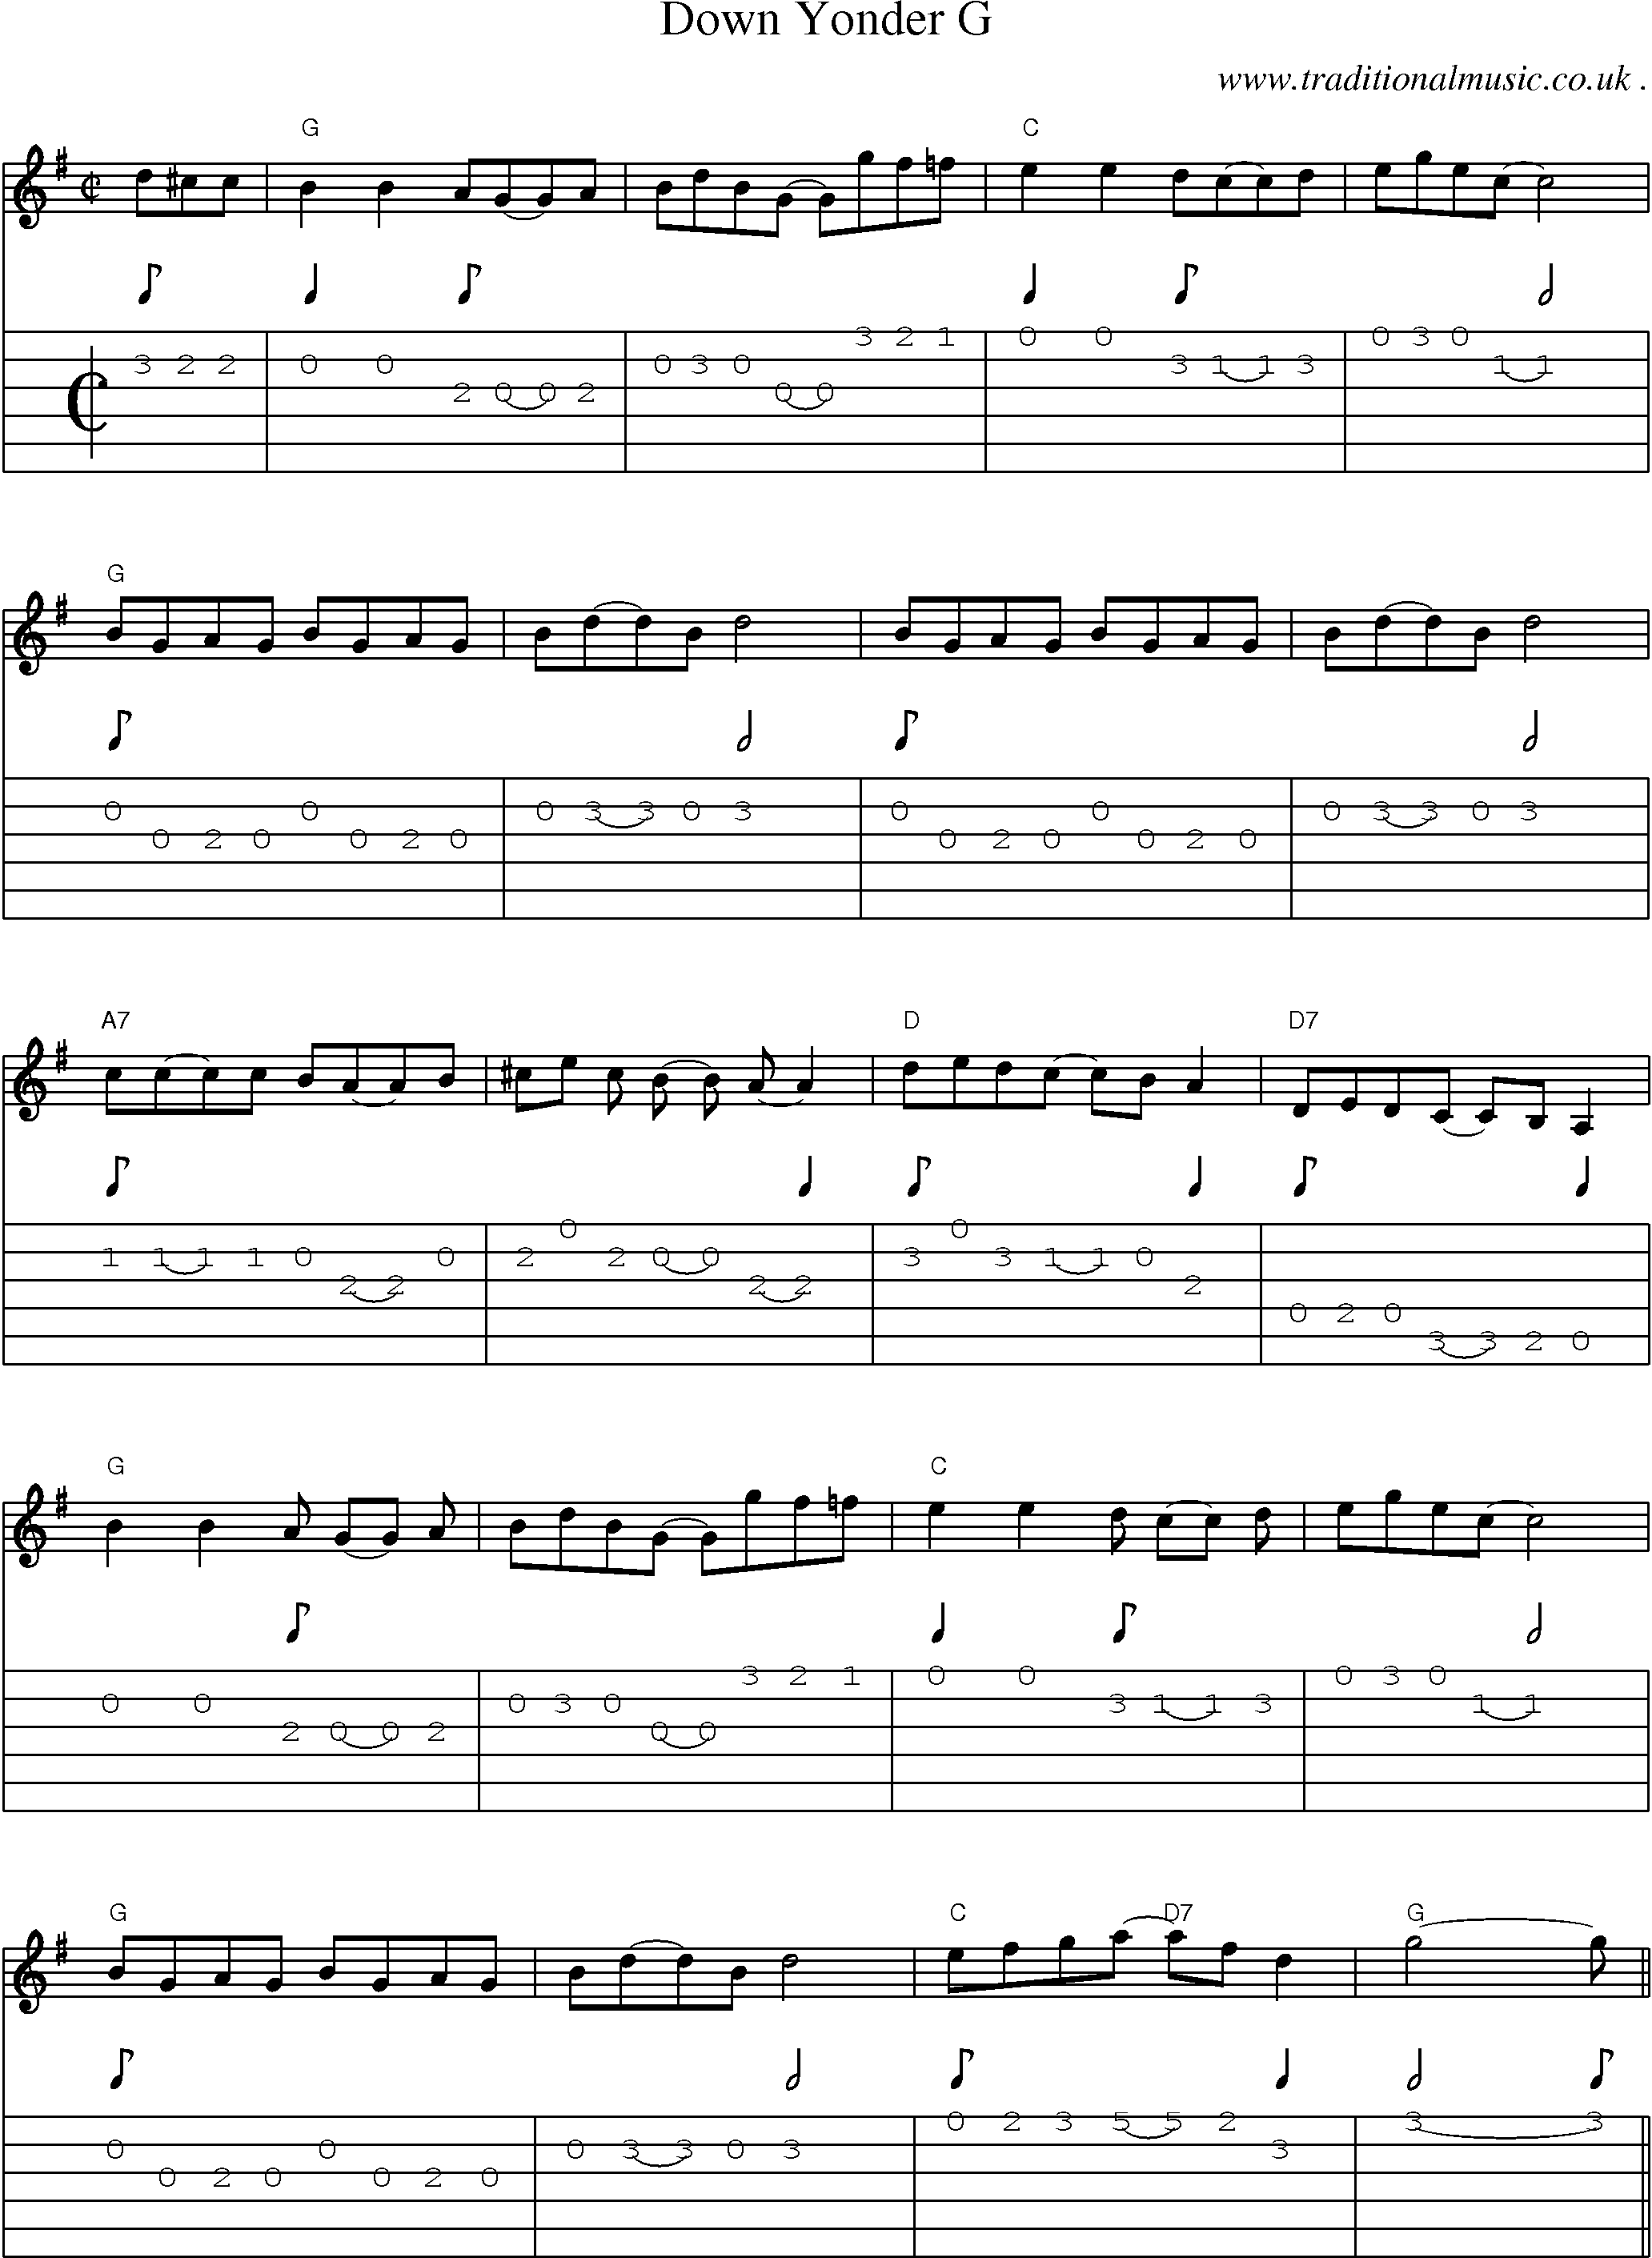 Music Score and Guitar Tabs for Down Yonder G